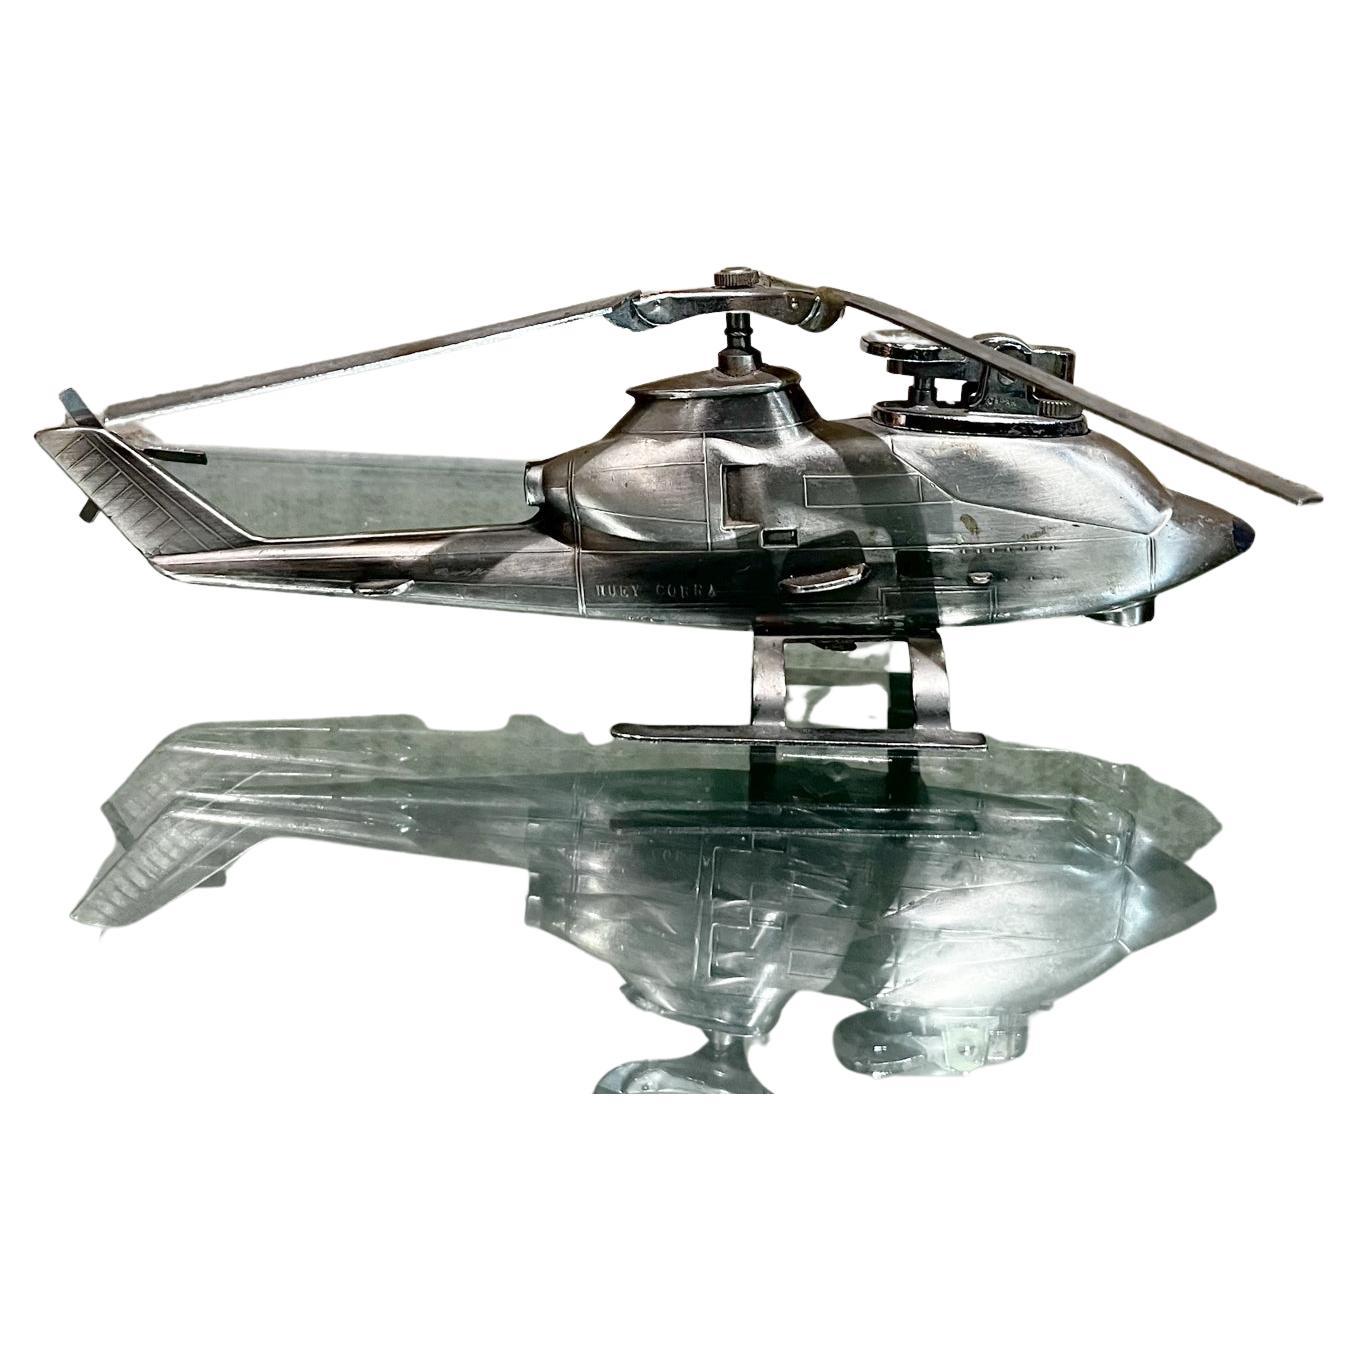 1980s Table Lighter Chrome Plated Huey Cobra Helicopter Japan